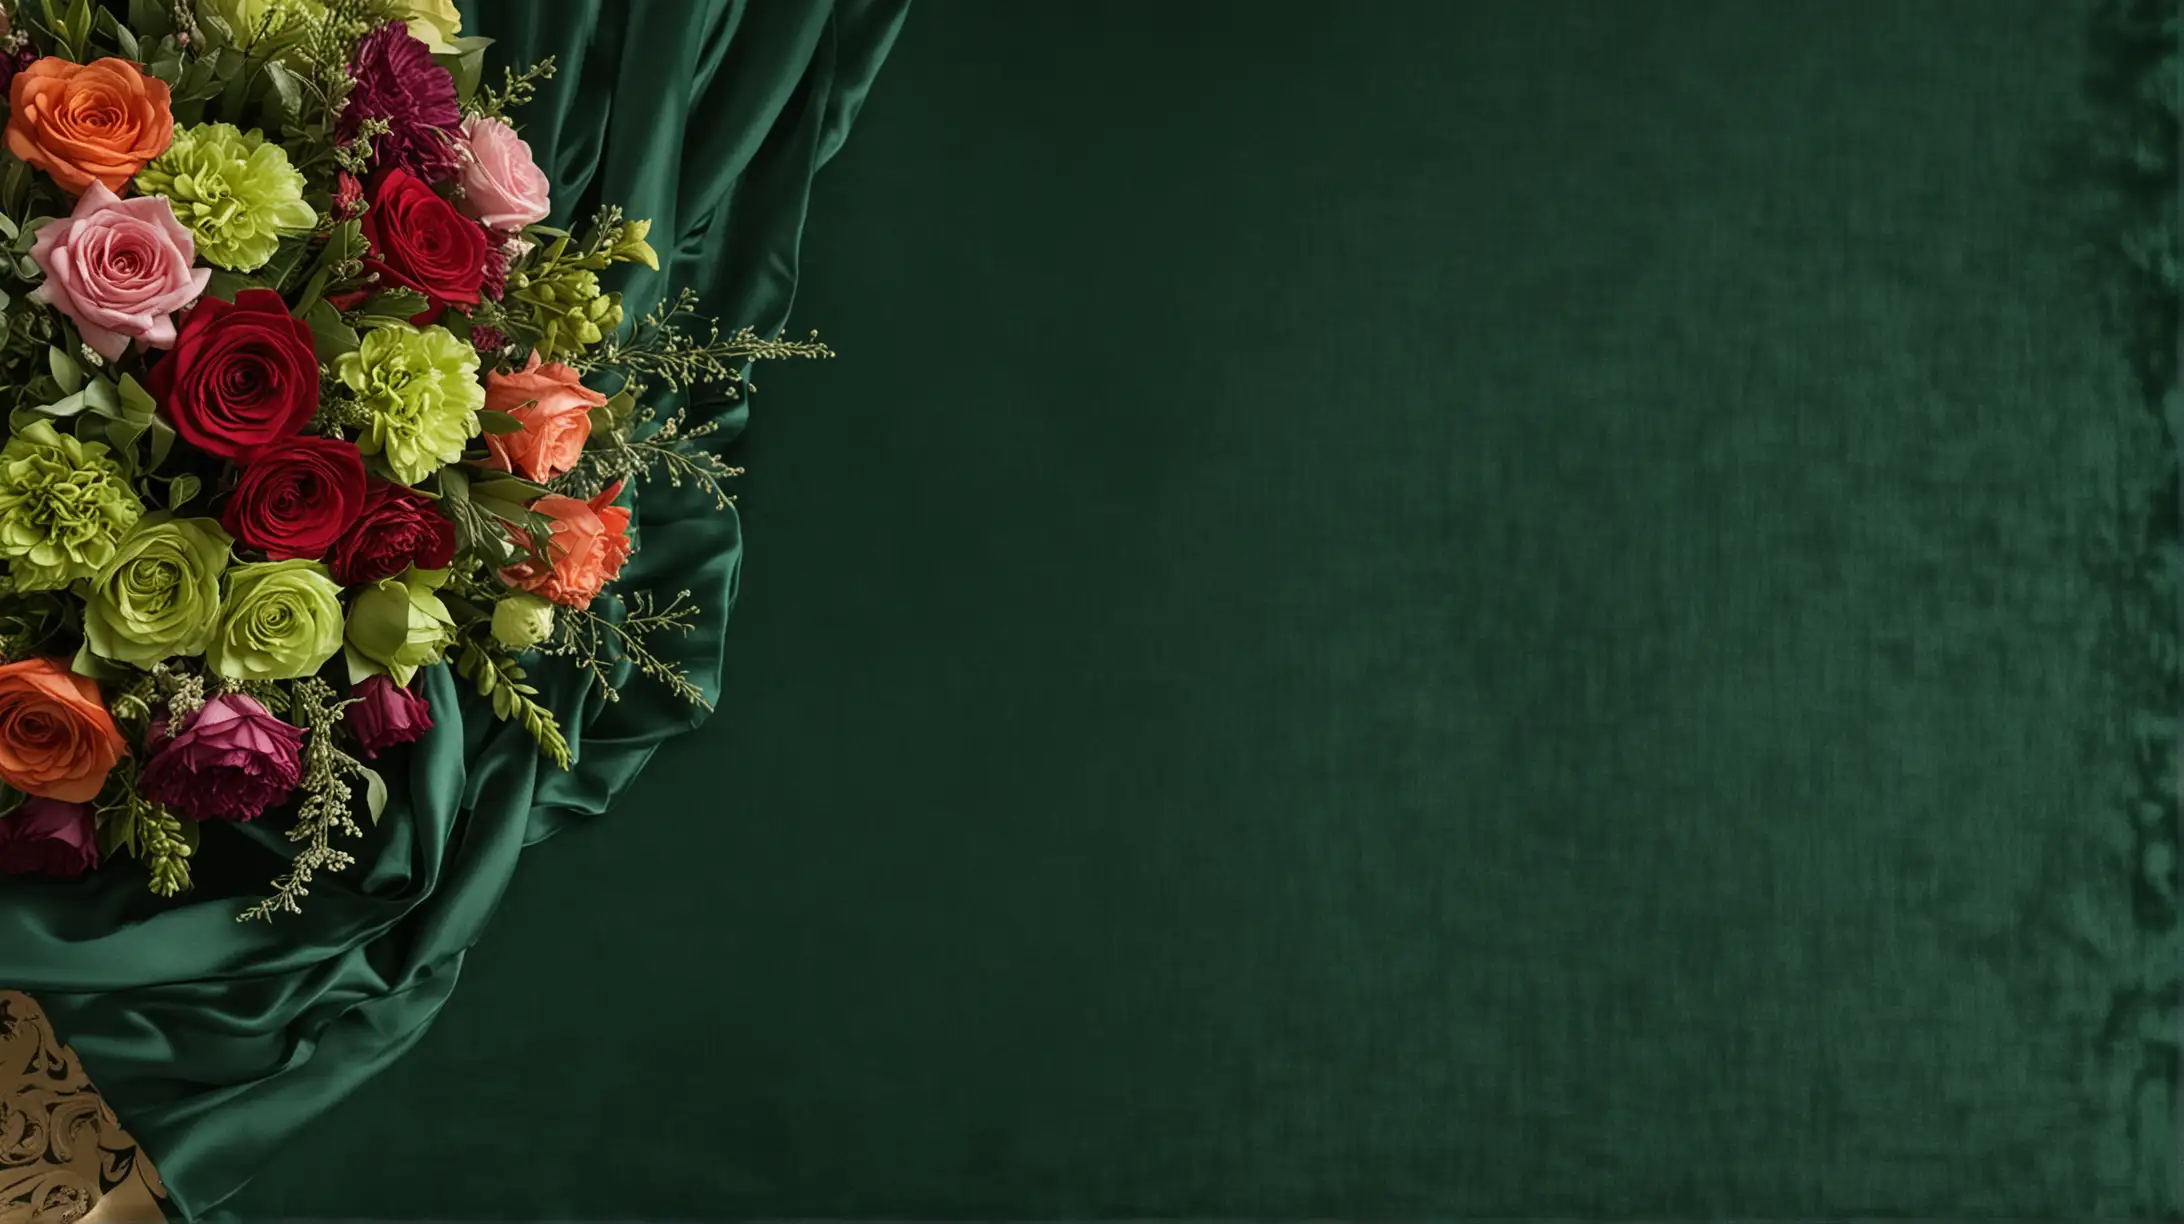 left side border draped green fabric, on left part of beautiful funeral colorful bouquet, large green velvet background